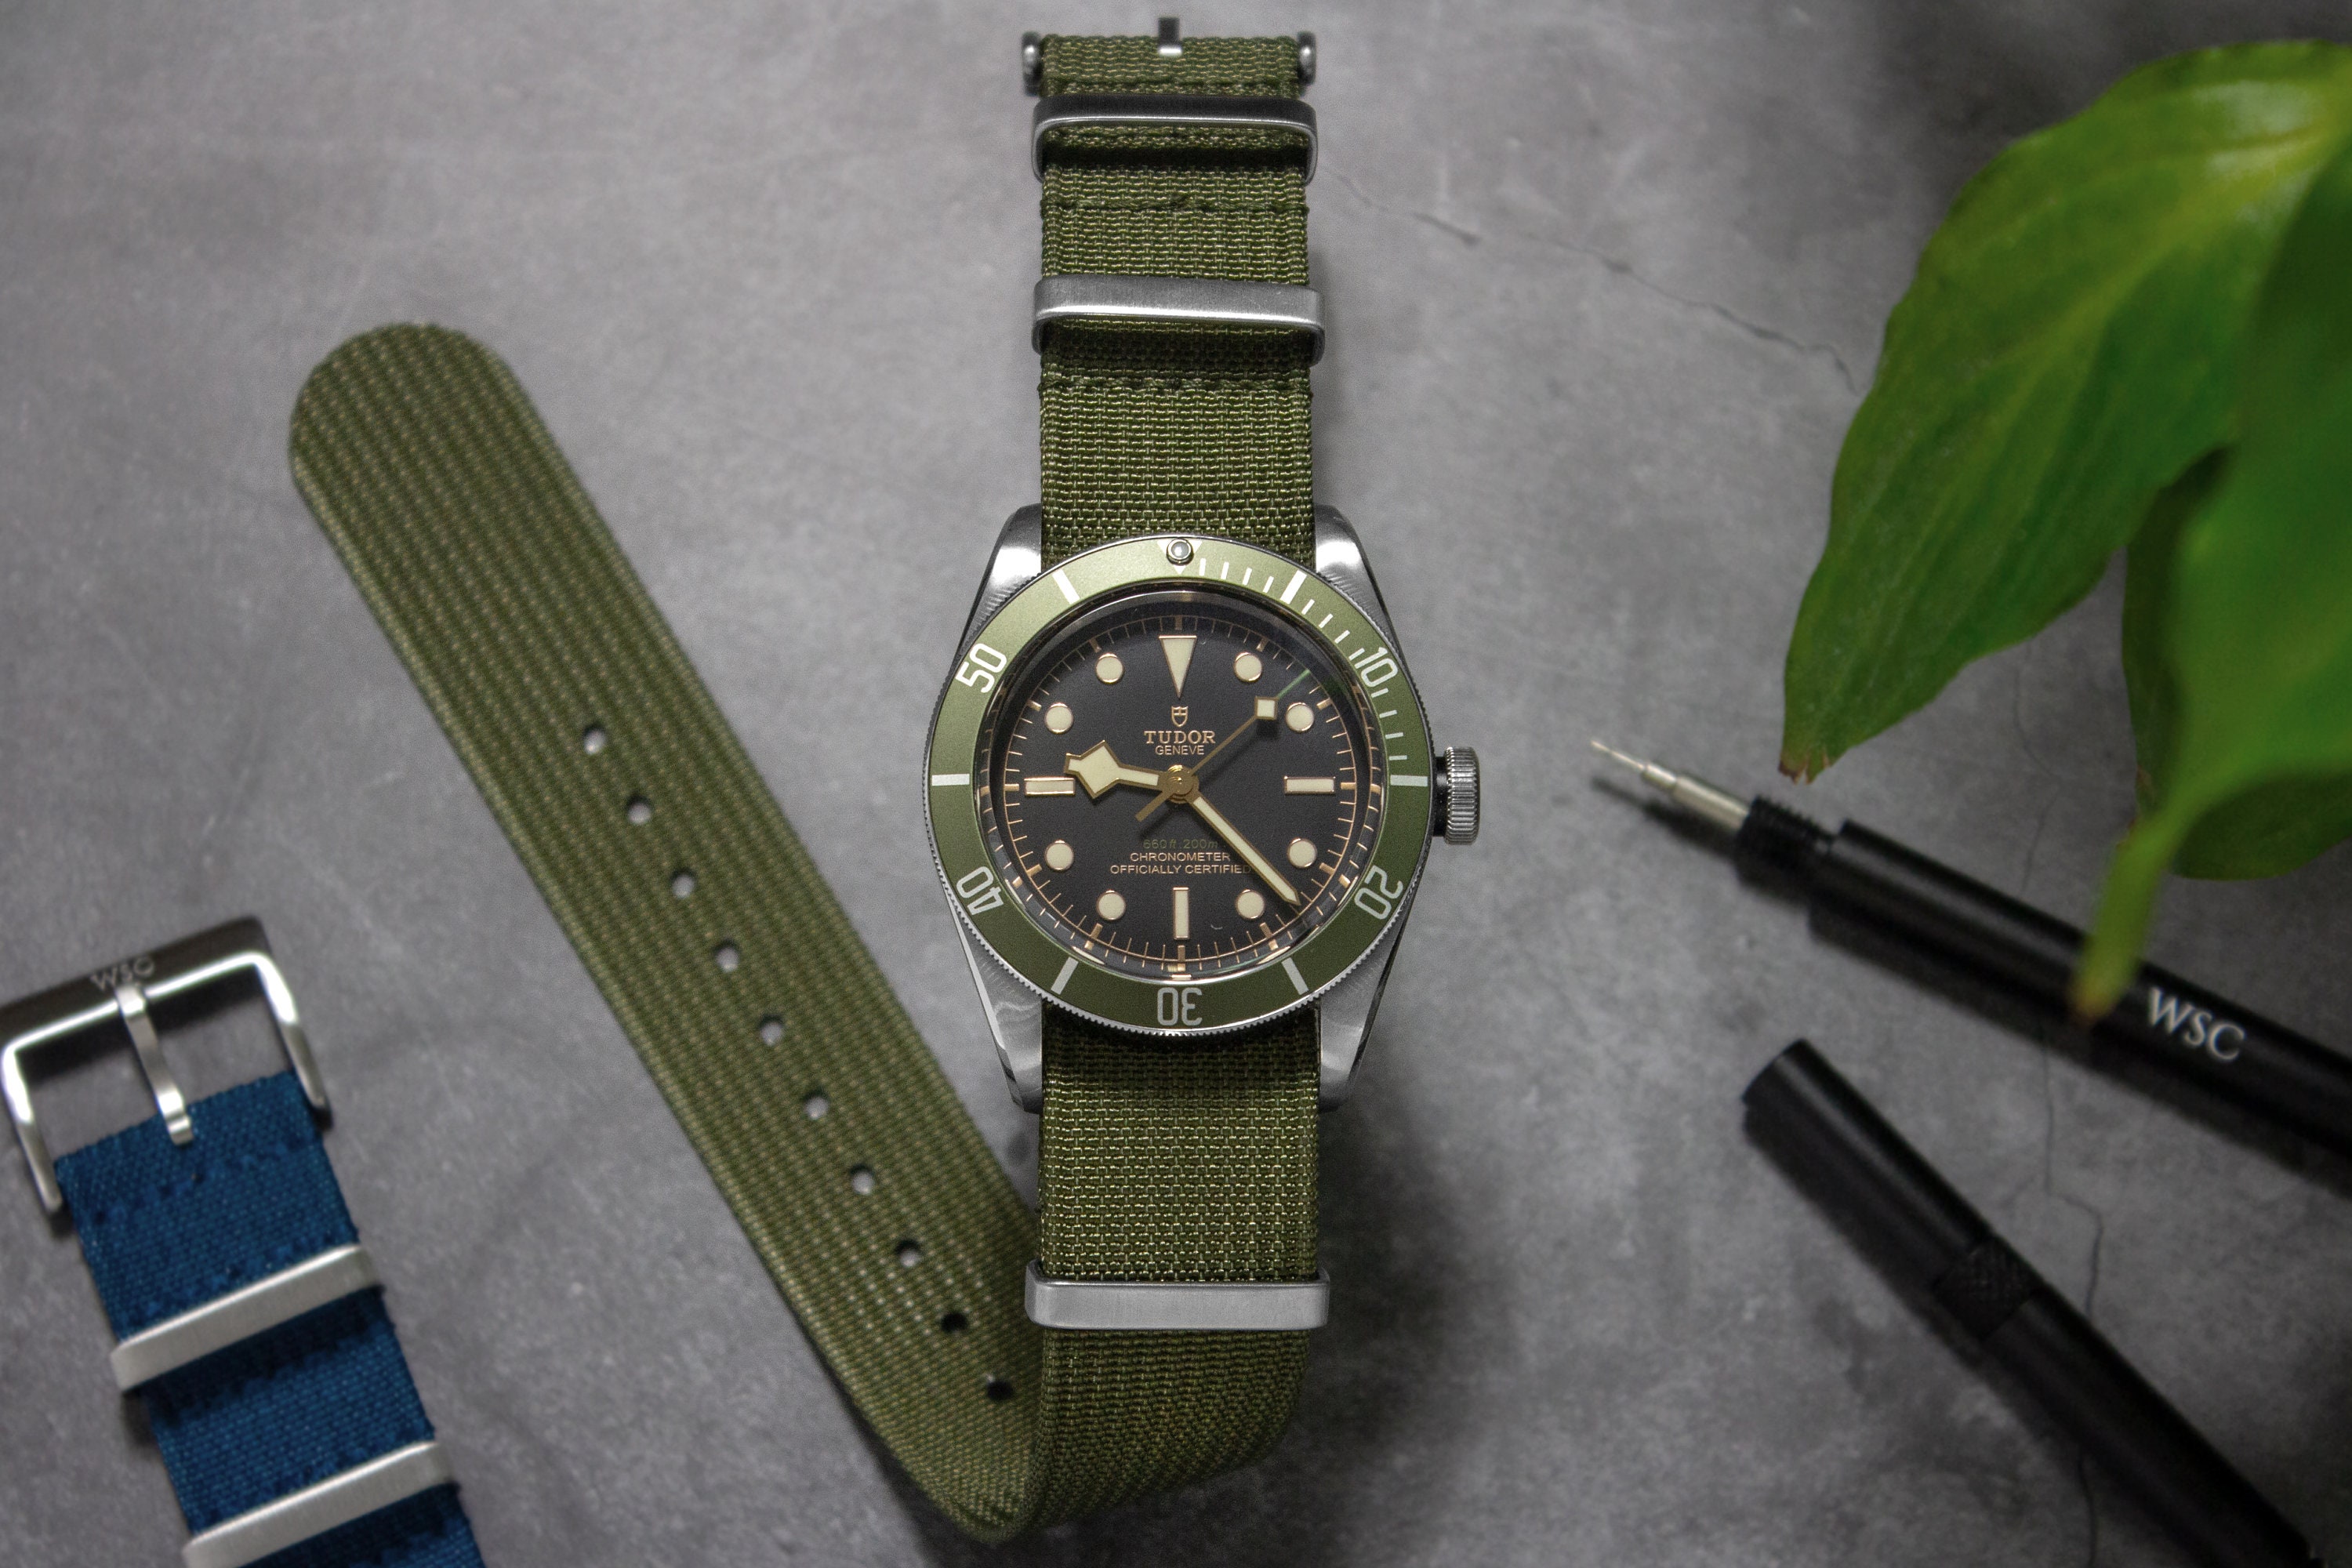 Has anyone used “the watch strap company” ? | MacRumors Forums